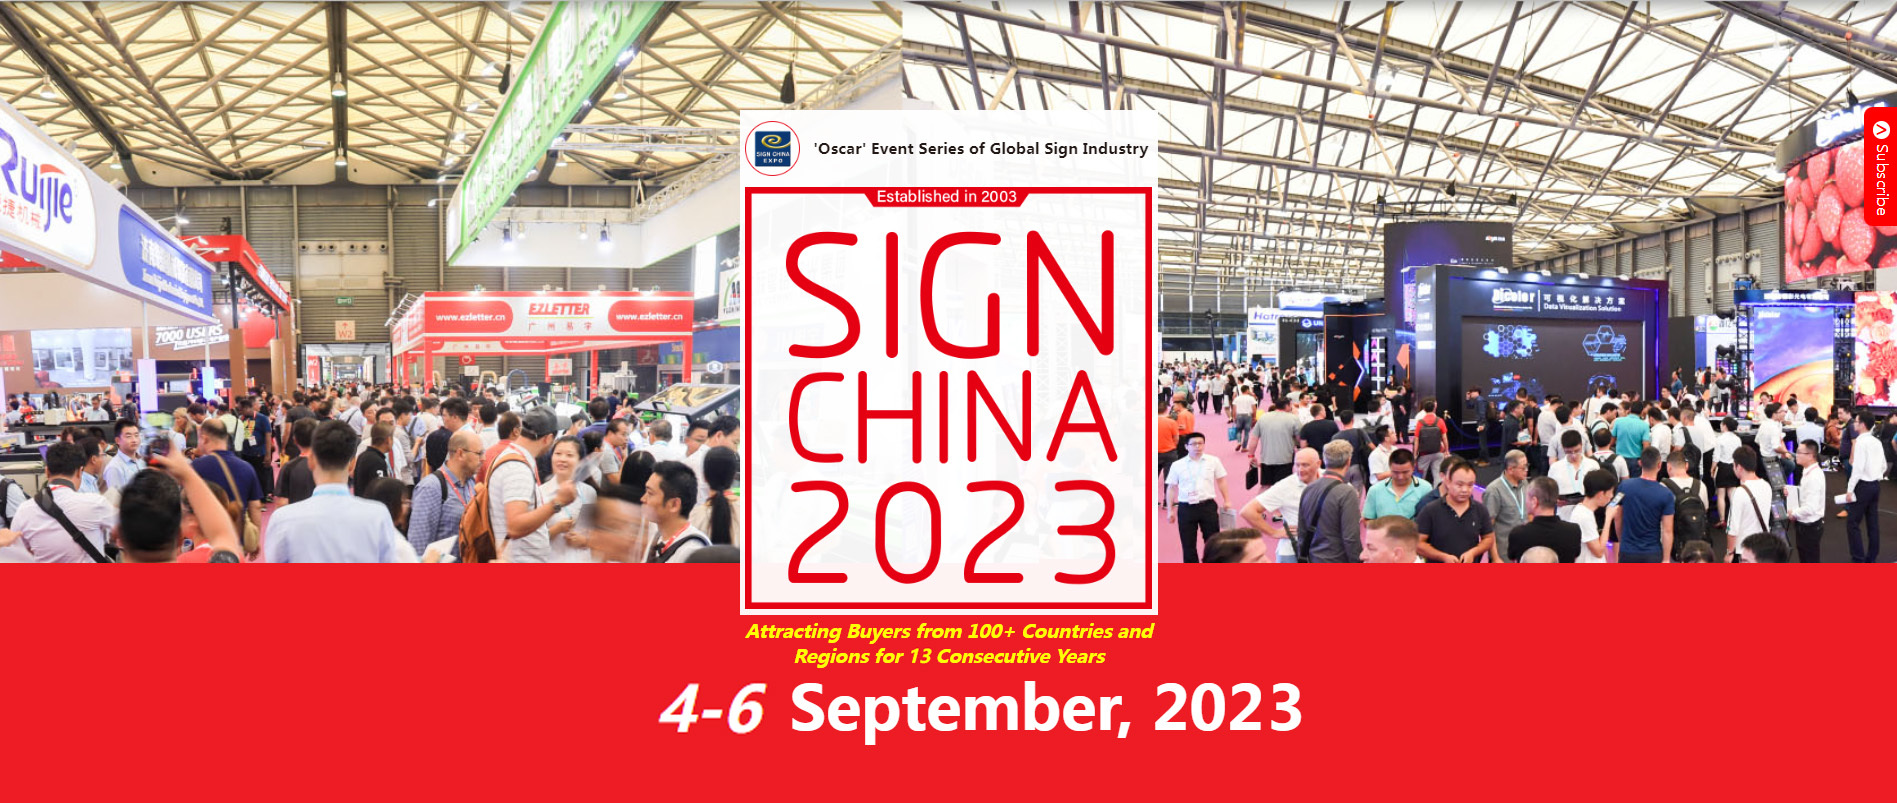 The 23rd Shanghai International Advertising Exhibition officially kicked off on the morning of September 4th at the Pudong New International Expo Center.